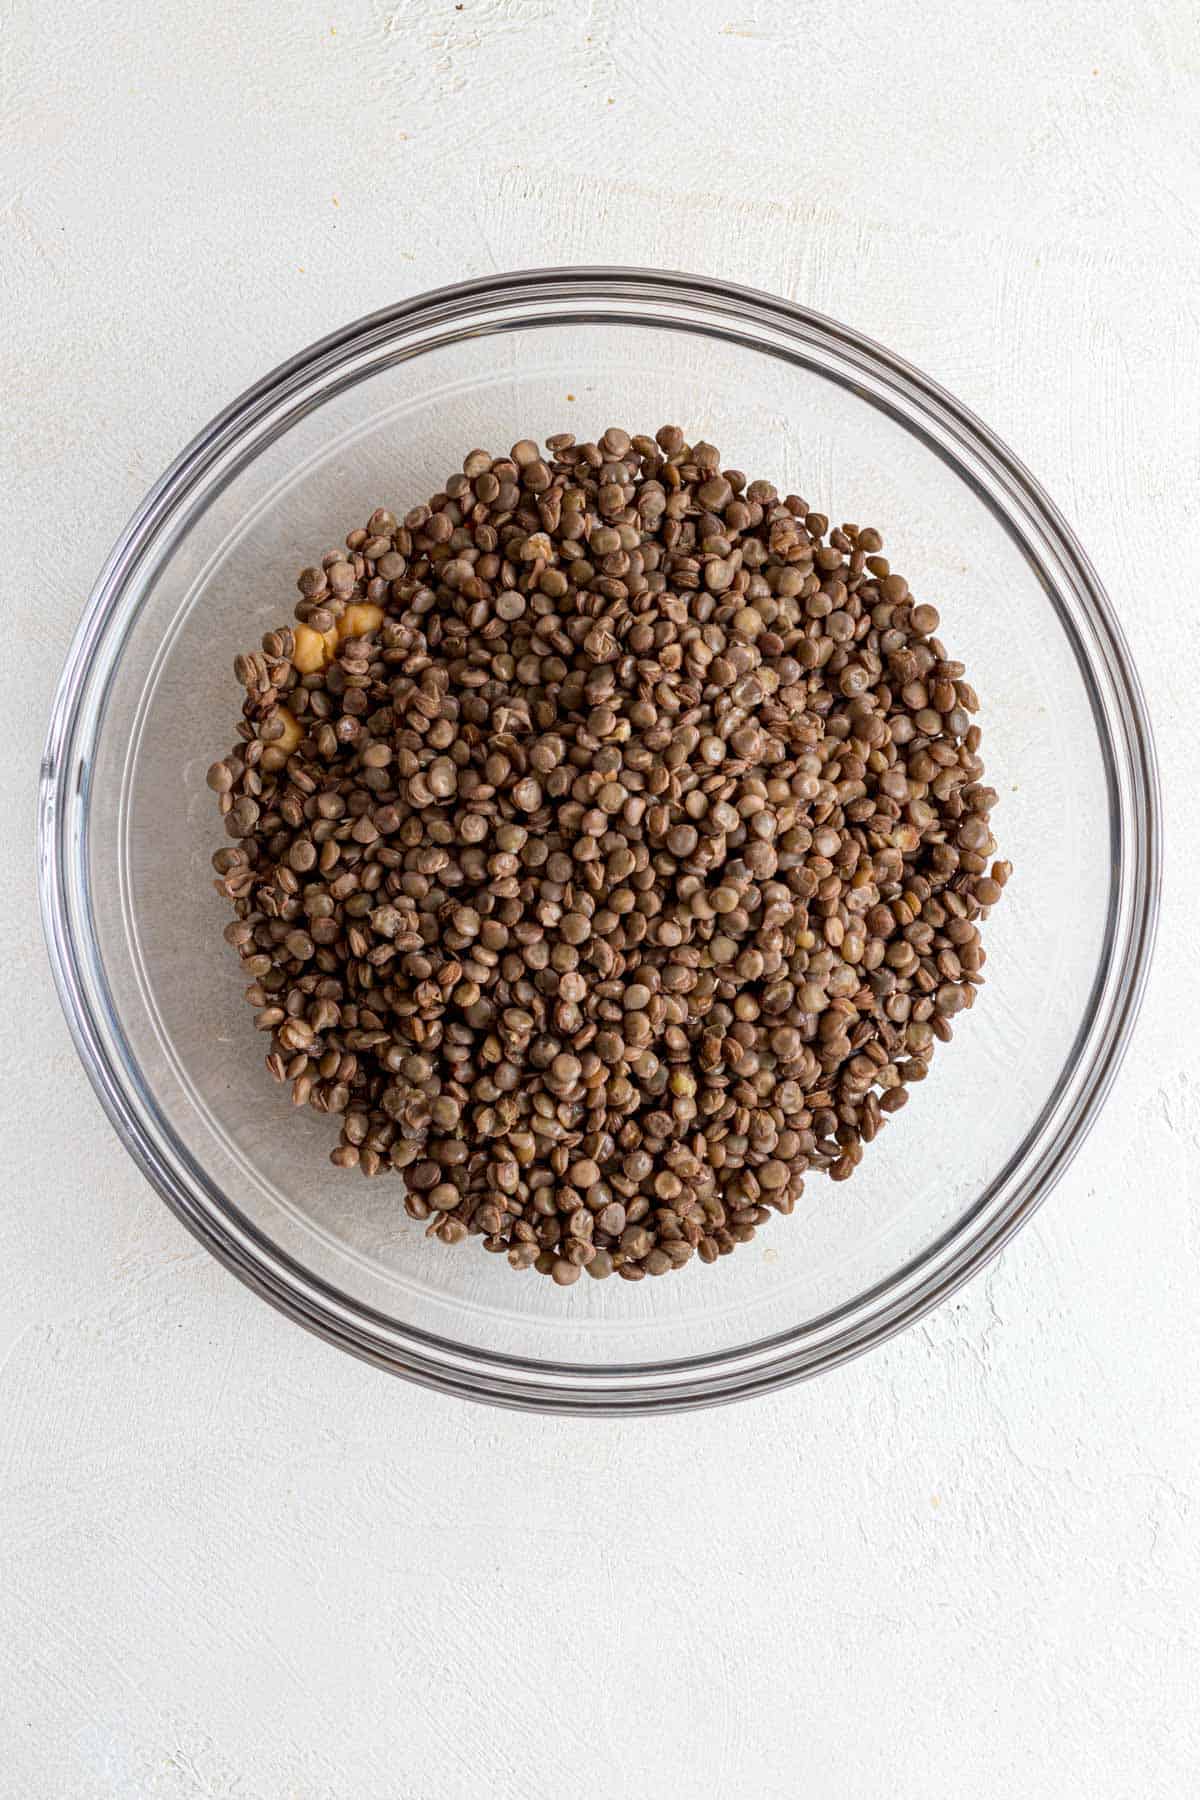 Lentils and chickpeas in glass mixing bowl.